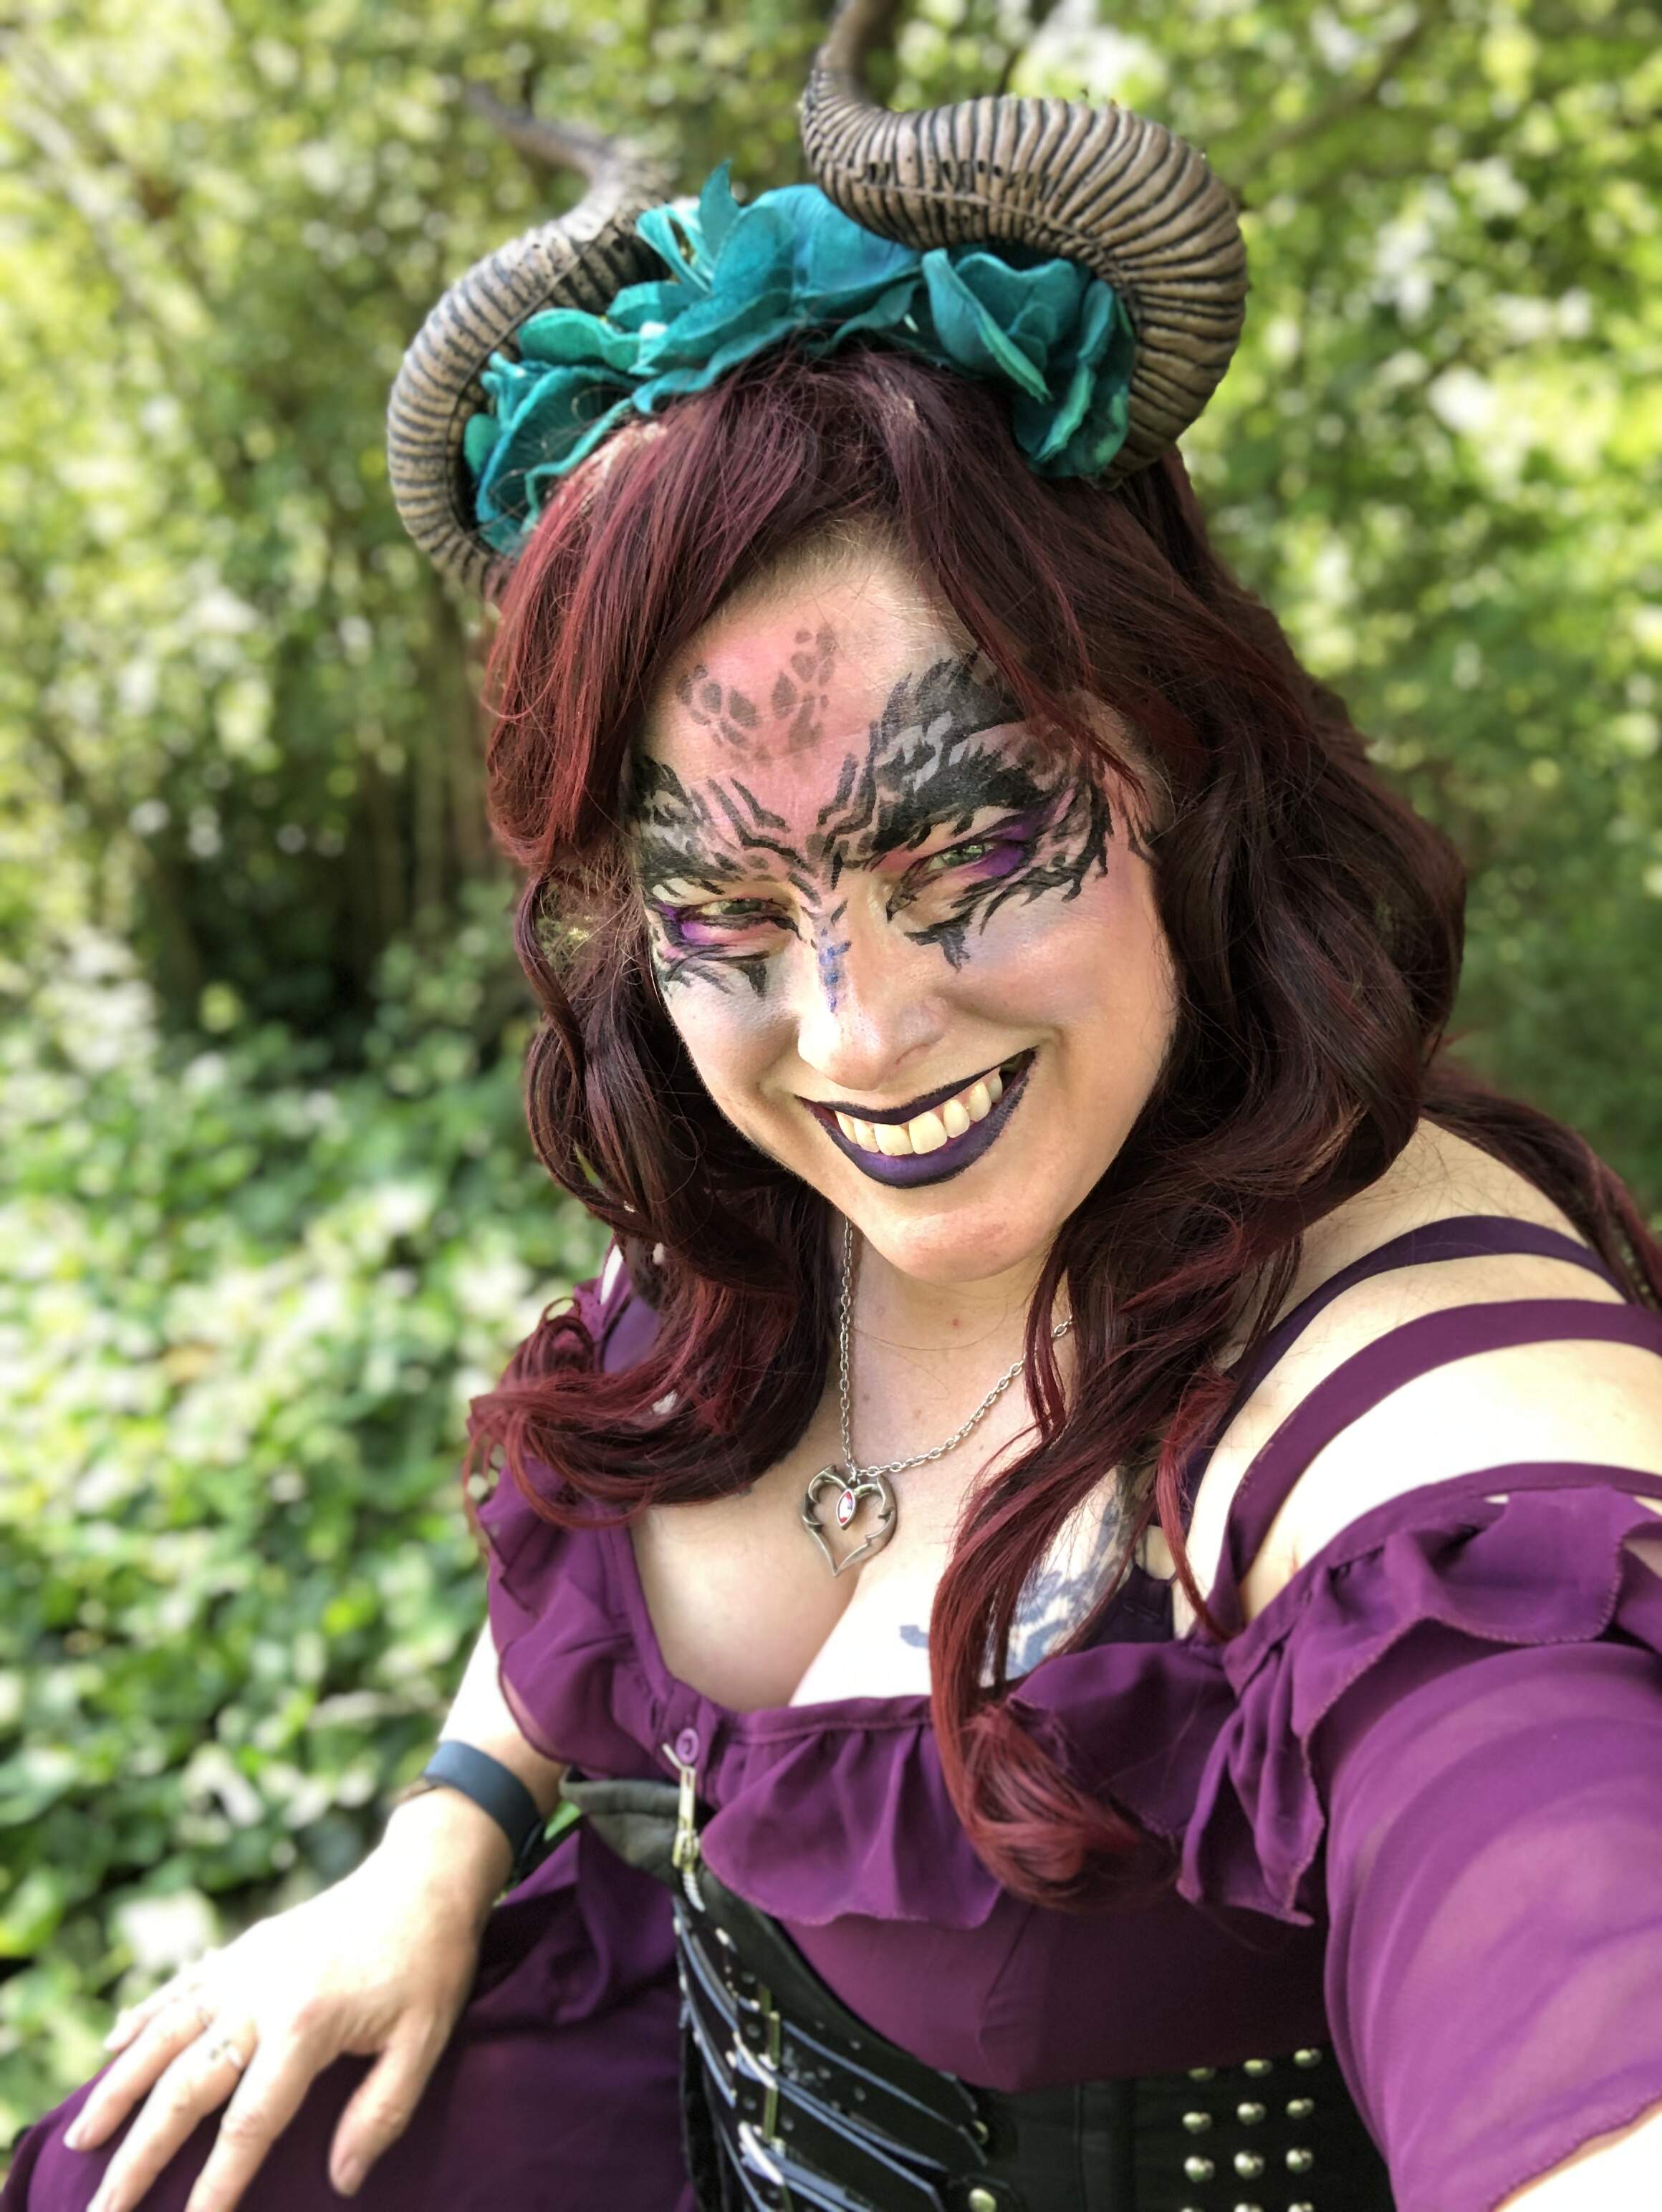 Attended Ocean City MD's Ocean Renaissance festival and made new friends.